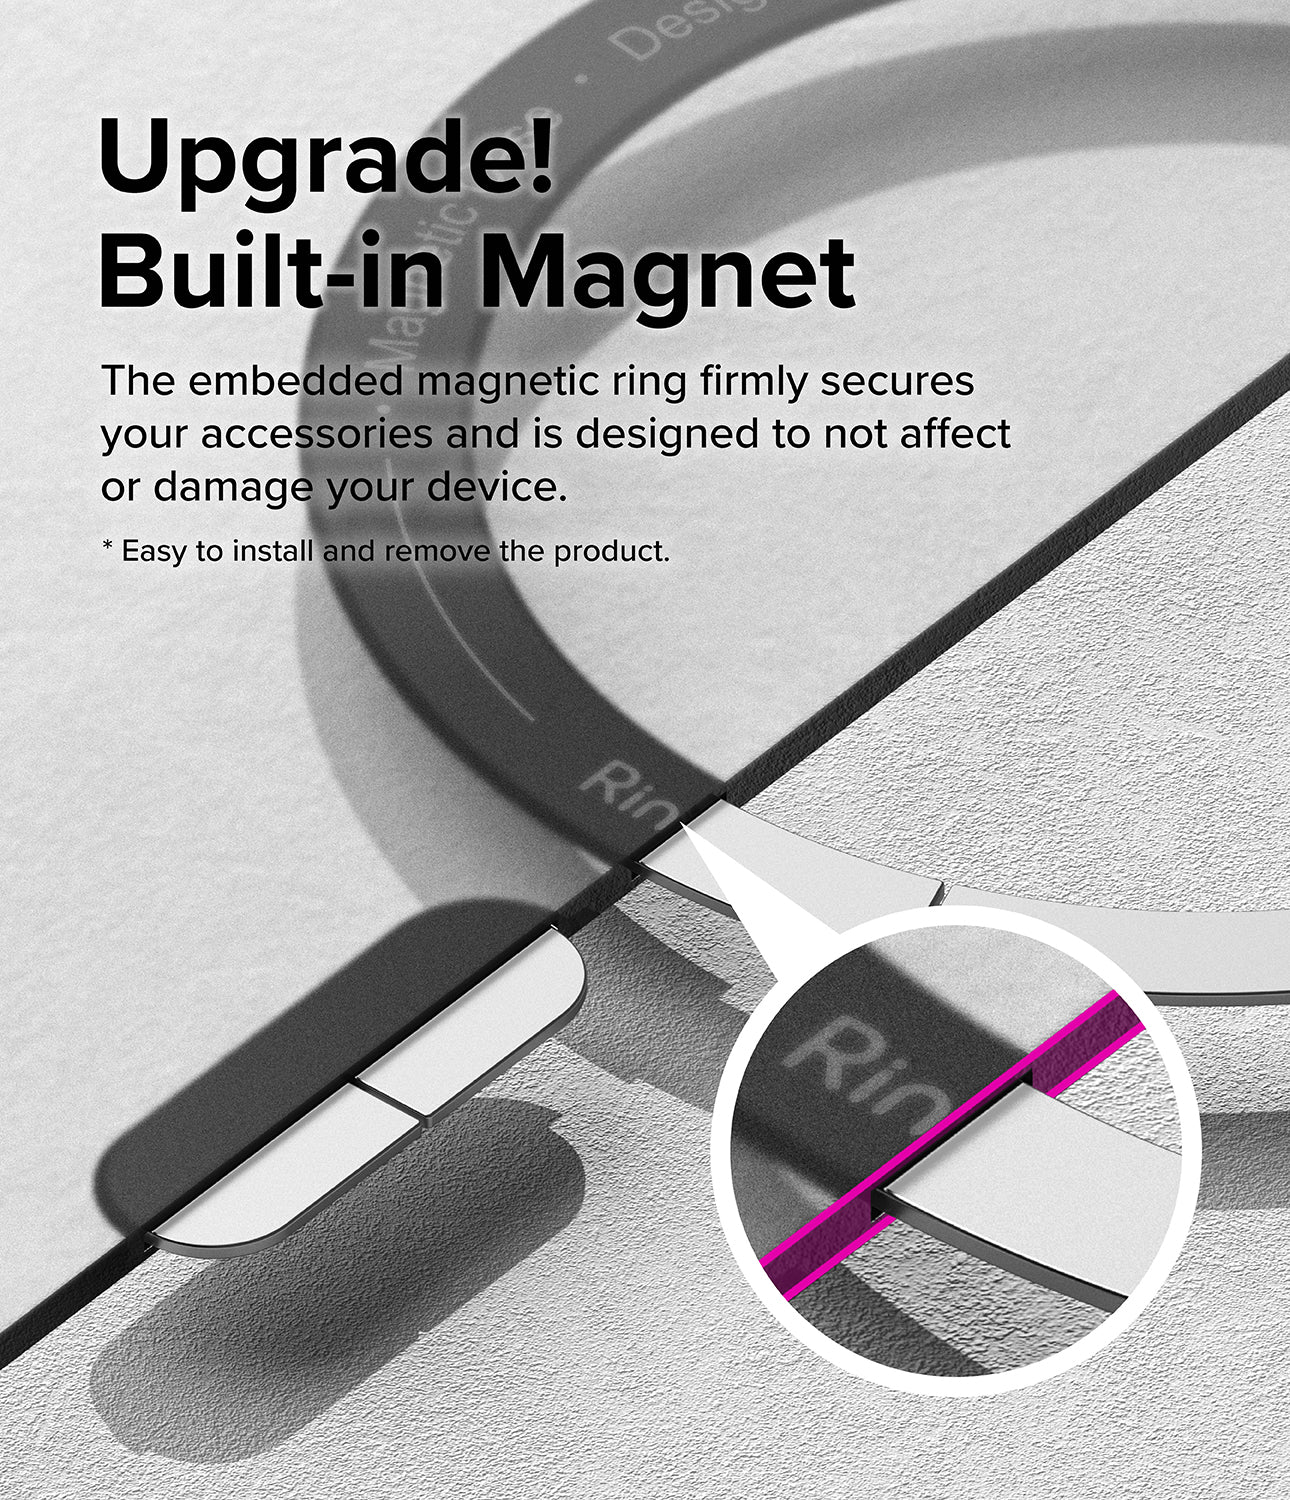 Galaxy S24 Ultra Case | Fusion-X Magnetic Matte - Upgrade! Built-in Magnet. The embedded magnetic ring firmly secures your accessories and is designed to not affect or damage your device.